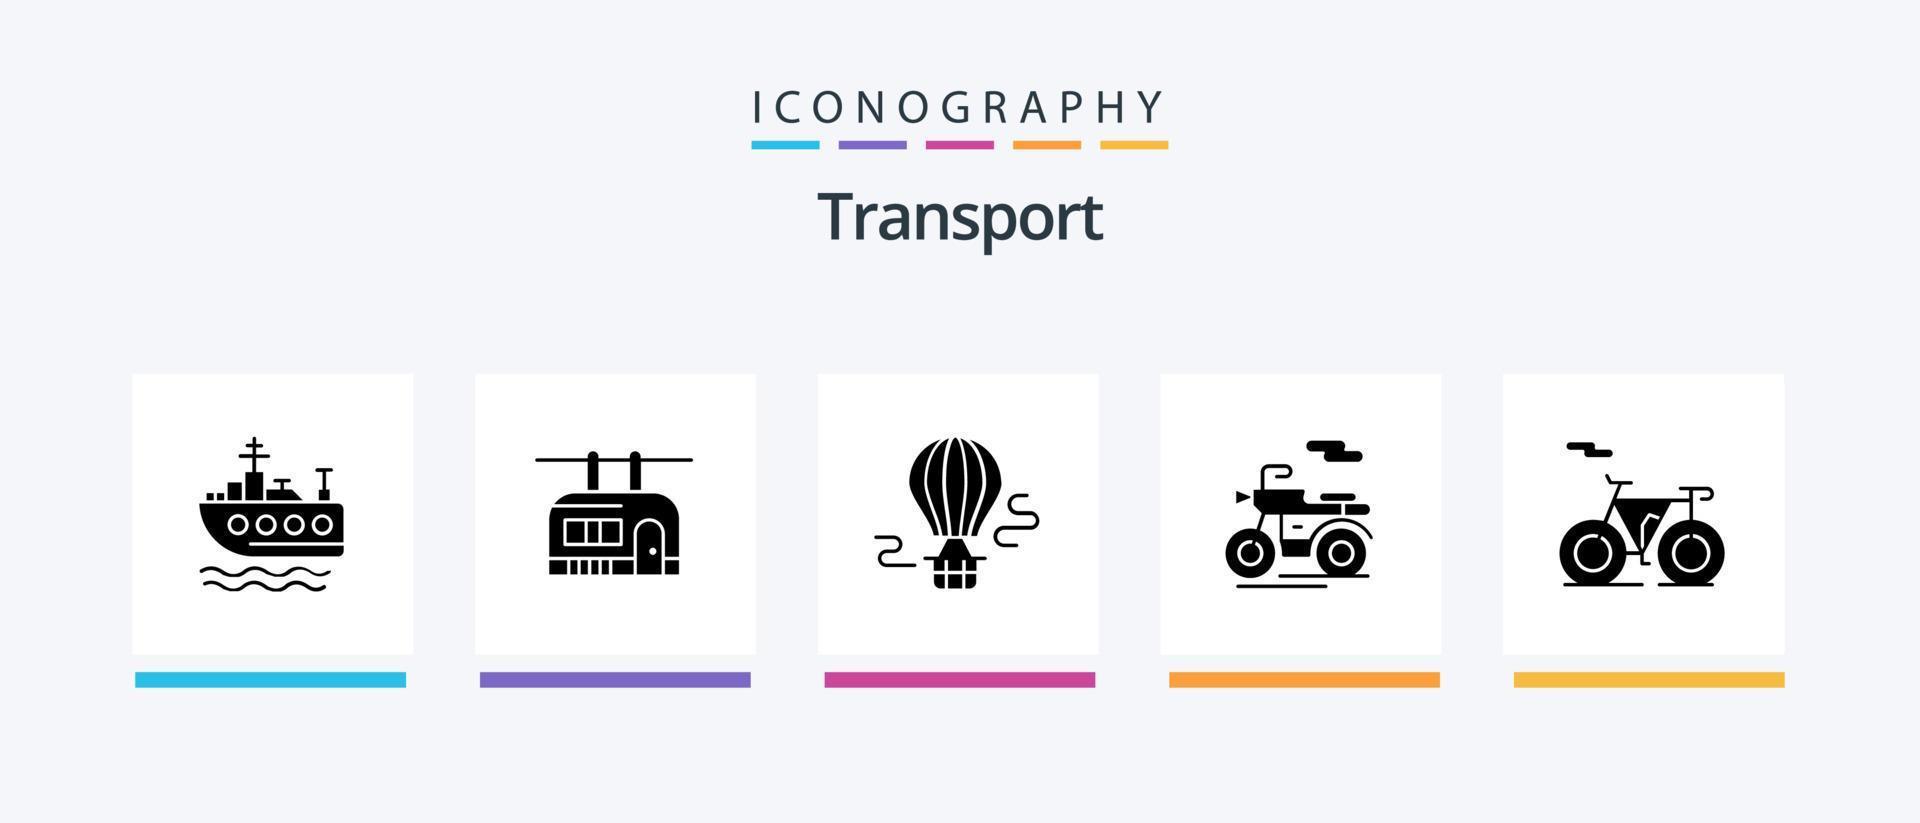 Transport Glyph 5 Icon Pack Including . outline. balloon. bicycle. scooter. Creative Icons Design vector